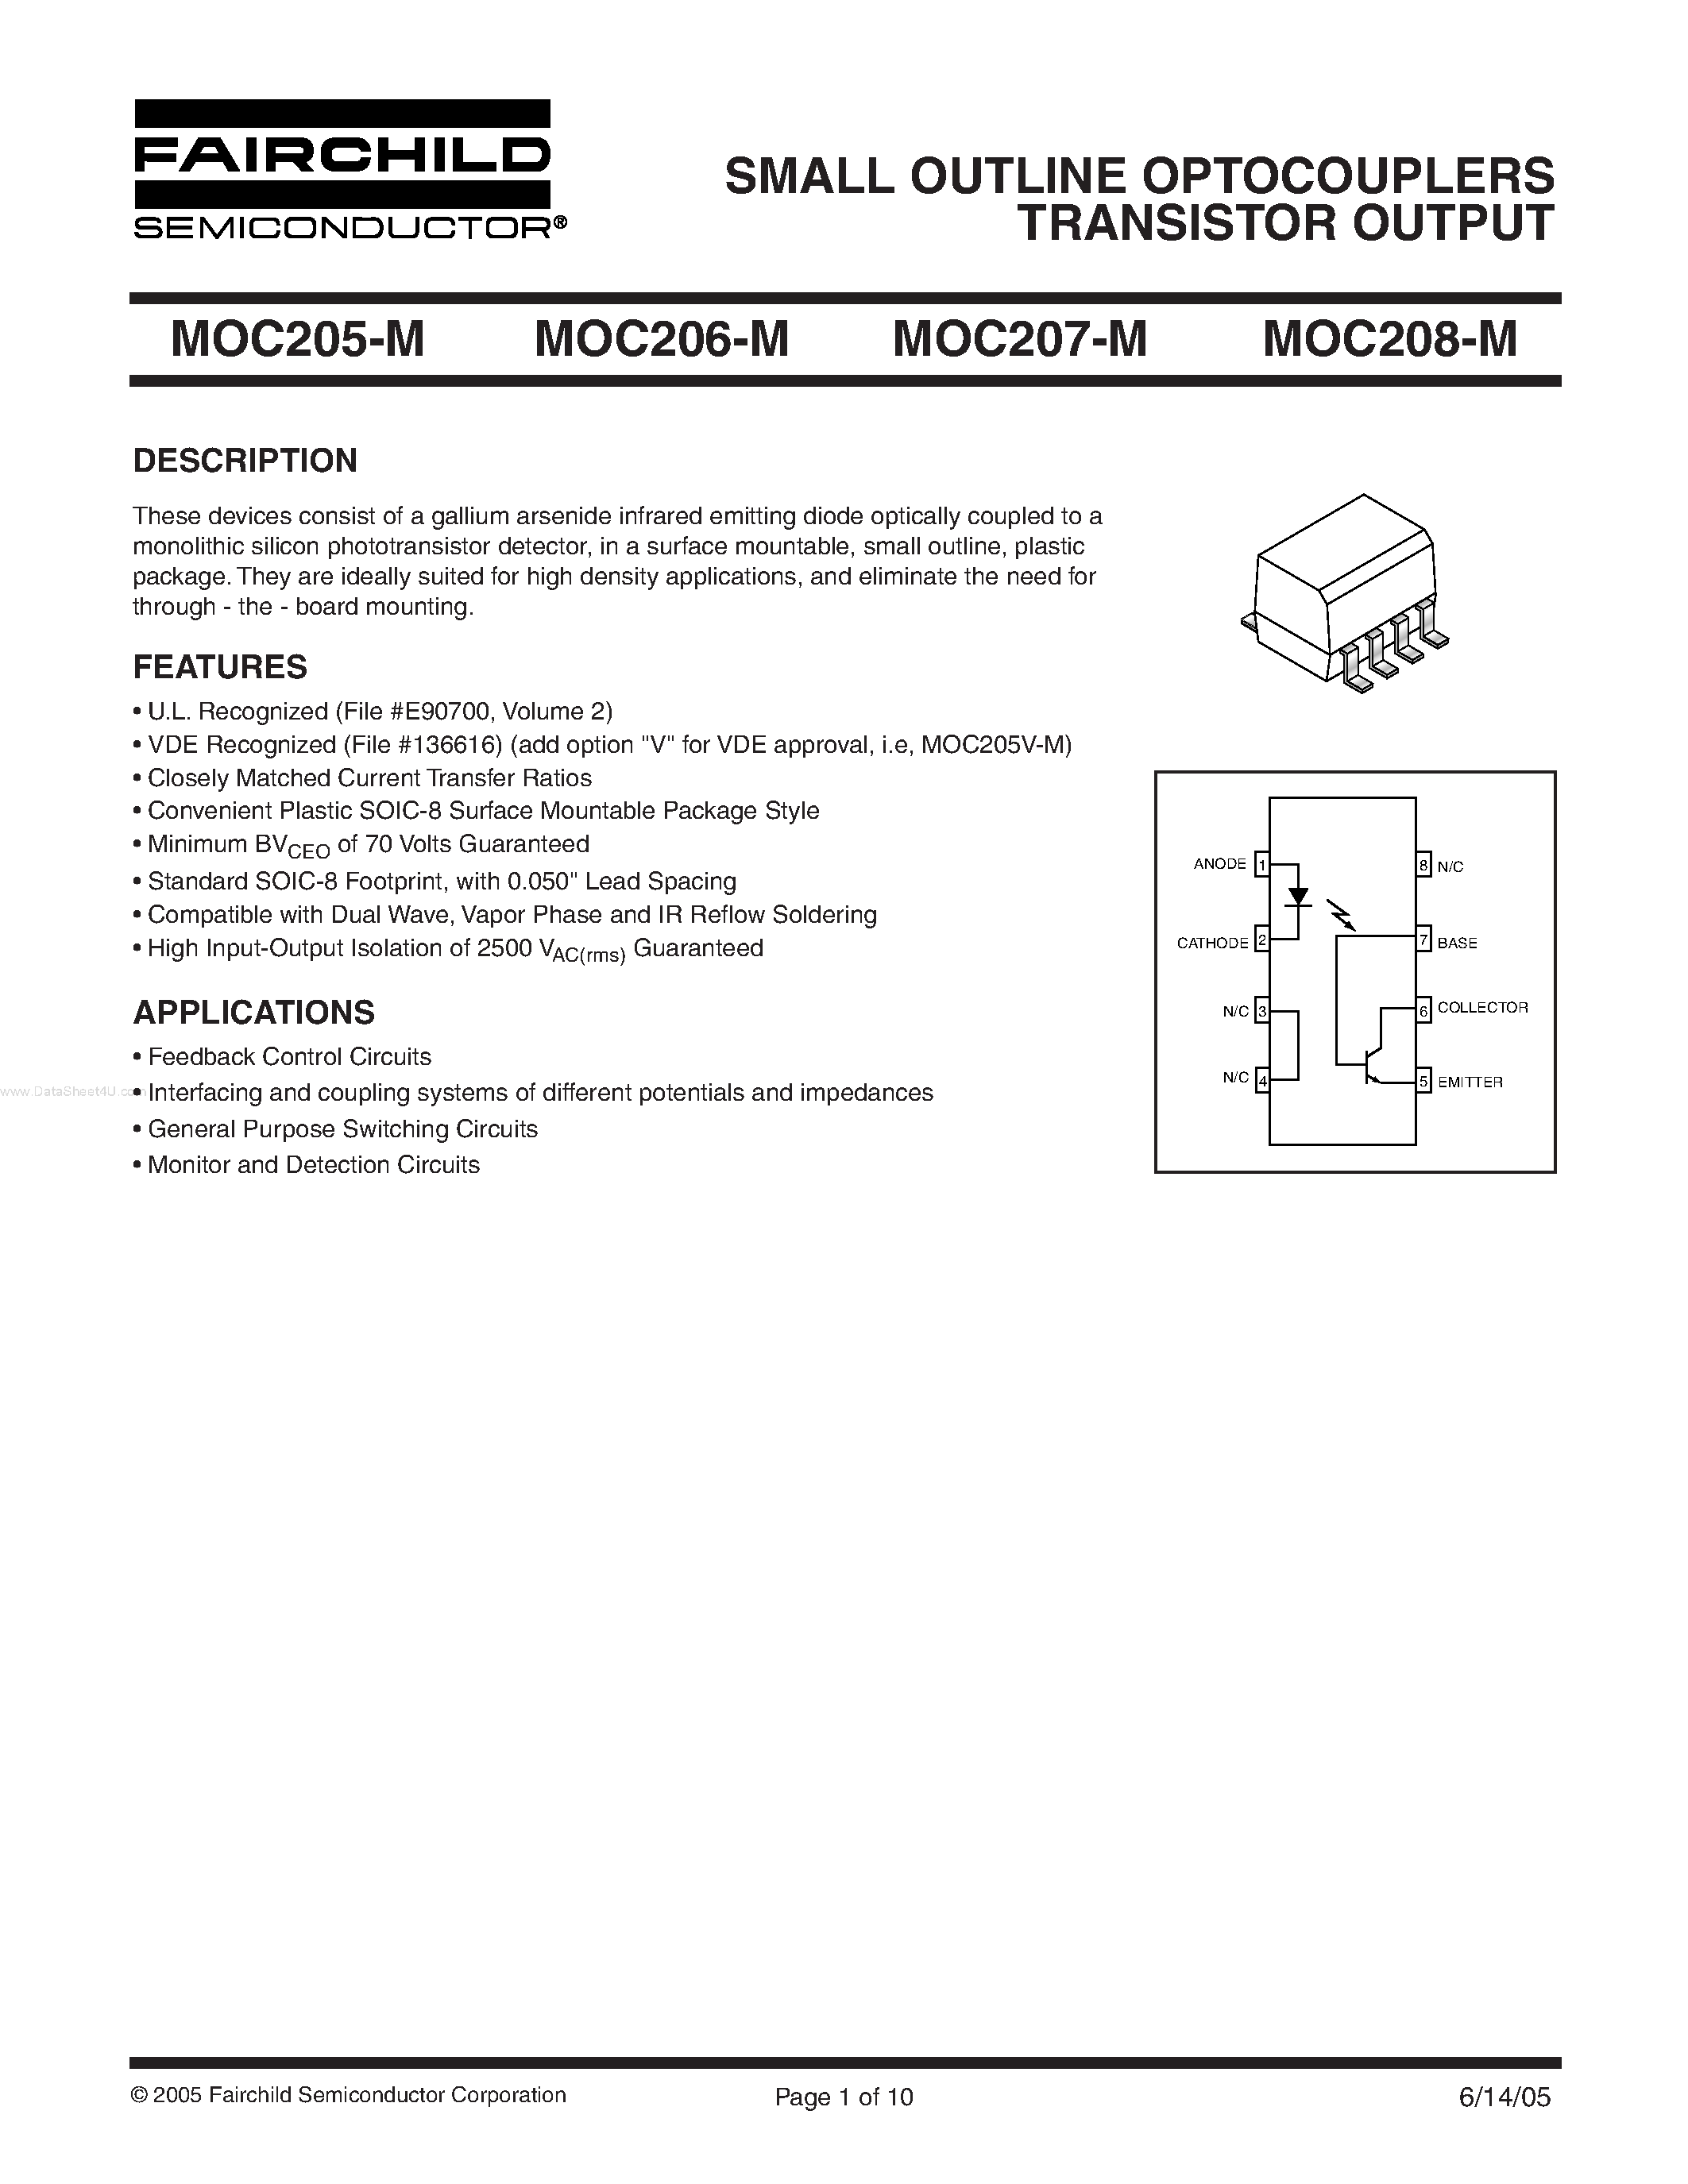 Datasheet MOC205-M - (MOC205-M - MOC208-M) SMALL OUTLINE OPTOCOUPLERS TRANSISTOR OUTPUT page 1